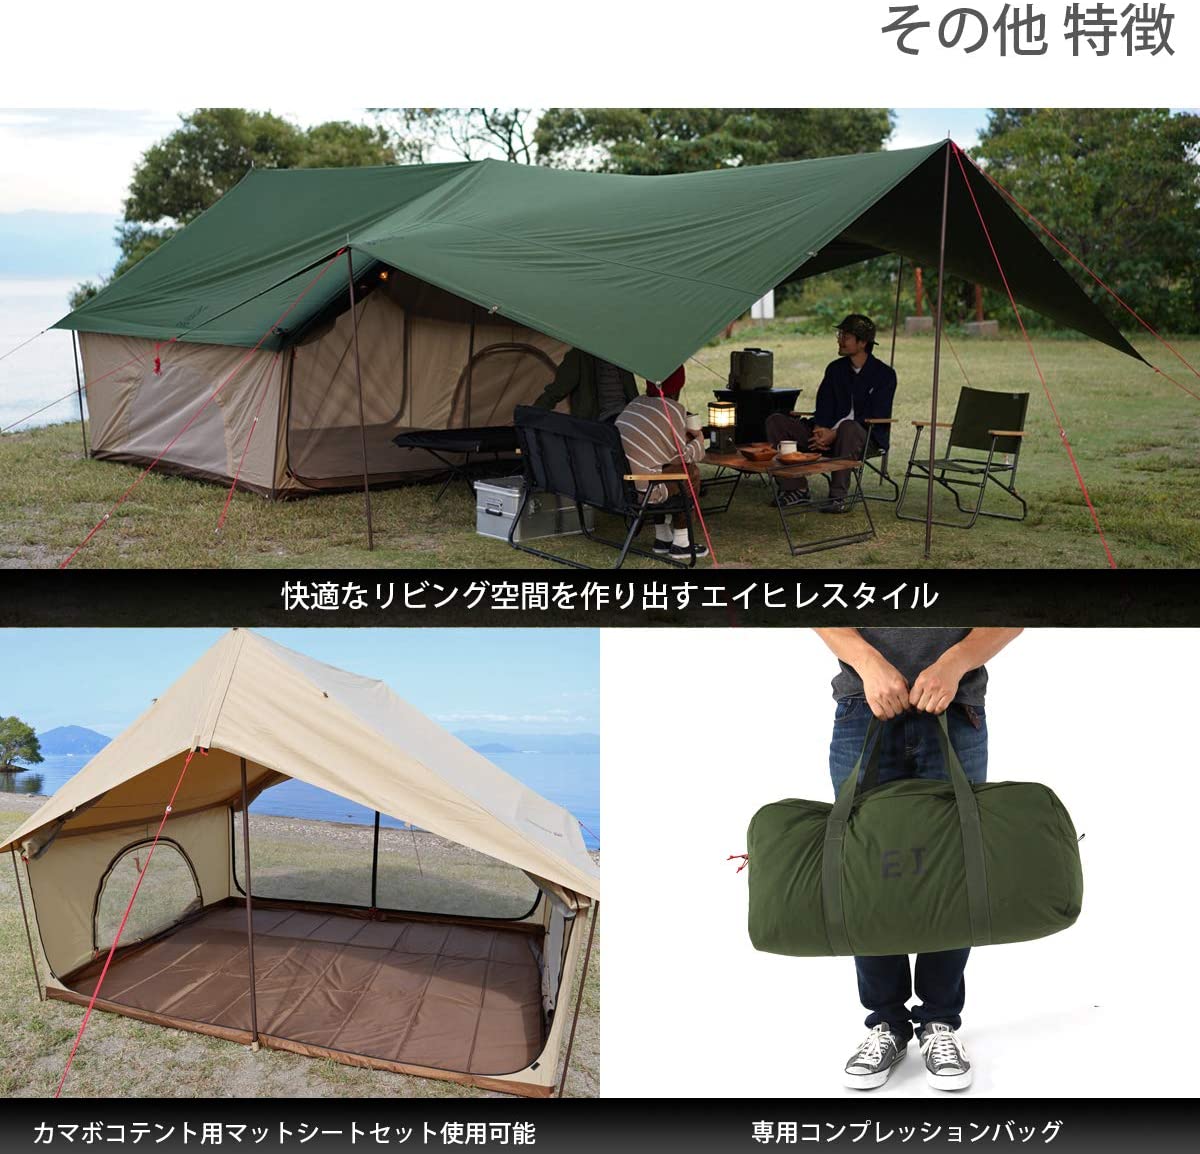 DOD EI TENT エイテント T5-668-KH (カーキ) | www.jarussi.com.br